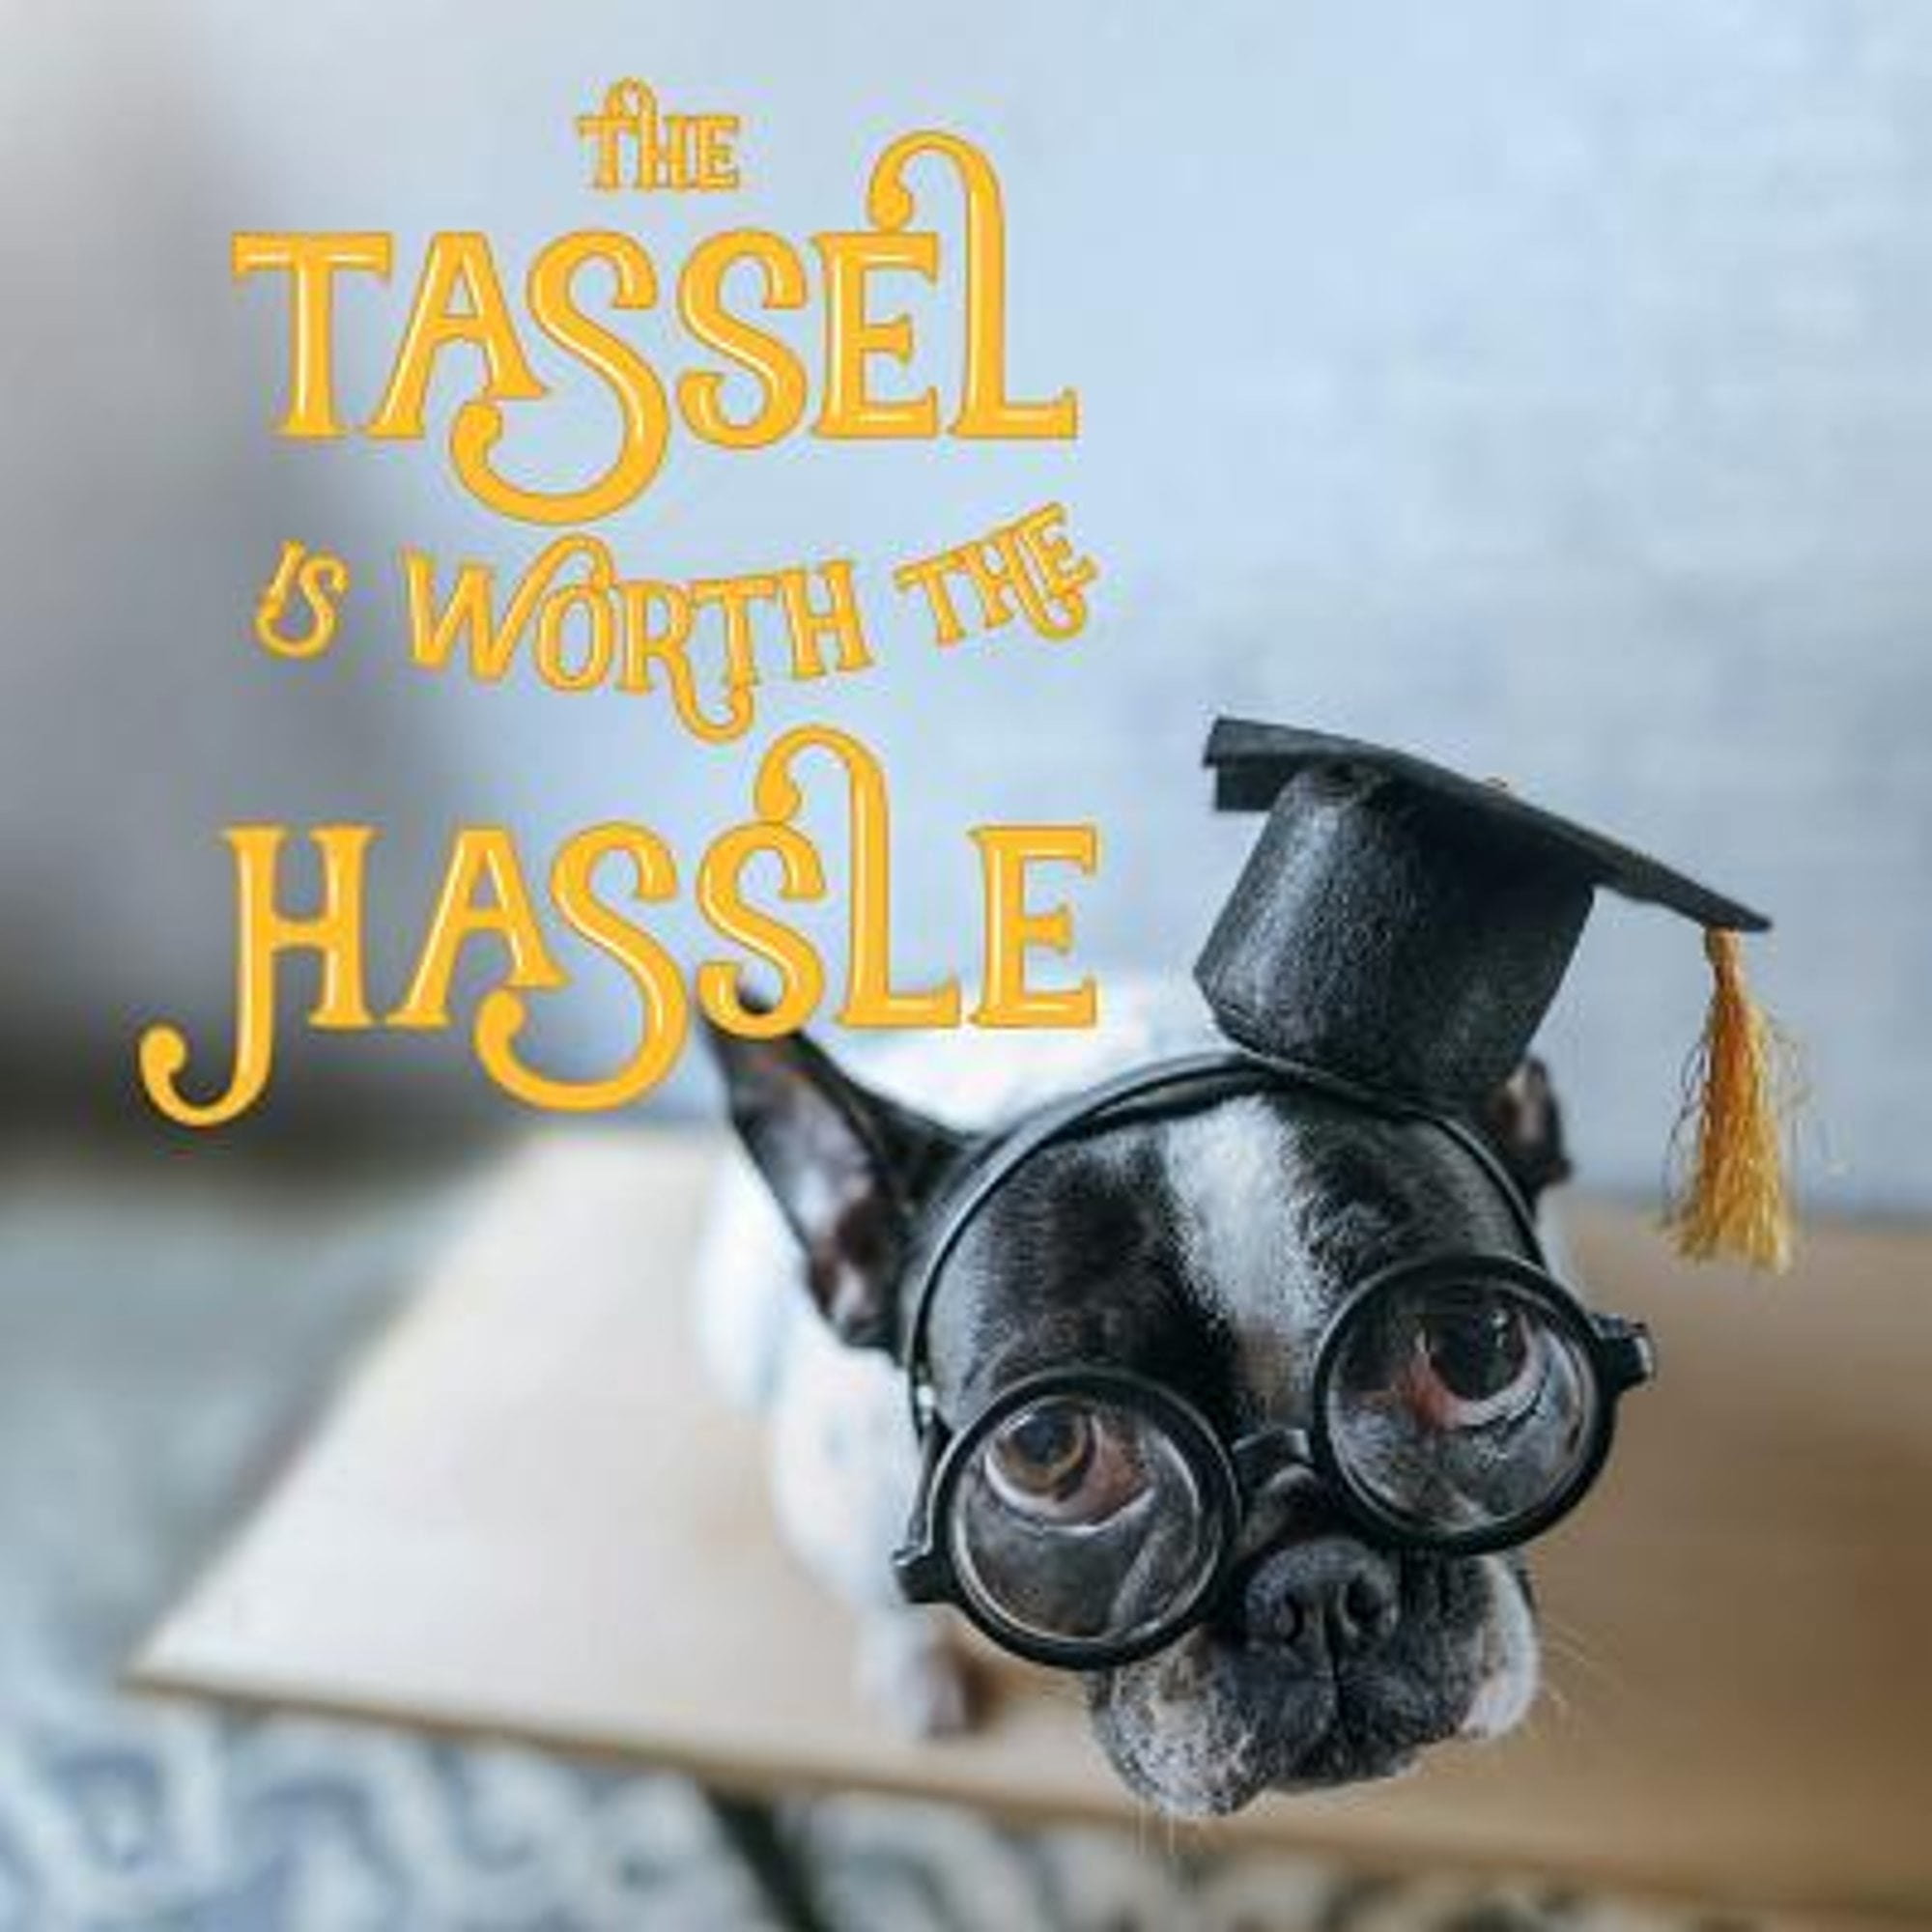 Pre-Owned The Tassel Is Worth the Hassle (Hardcover 9781423649007) by Gibbs Smith (Creator)